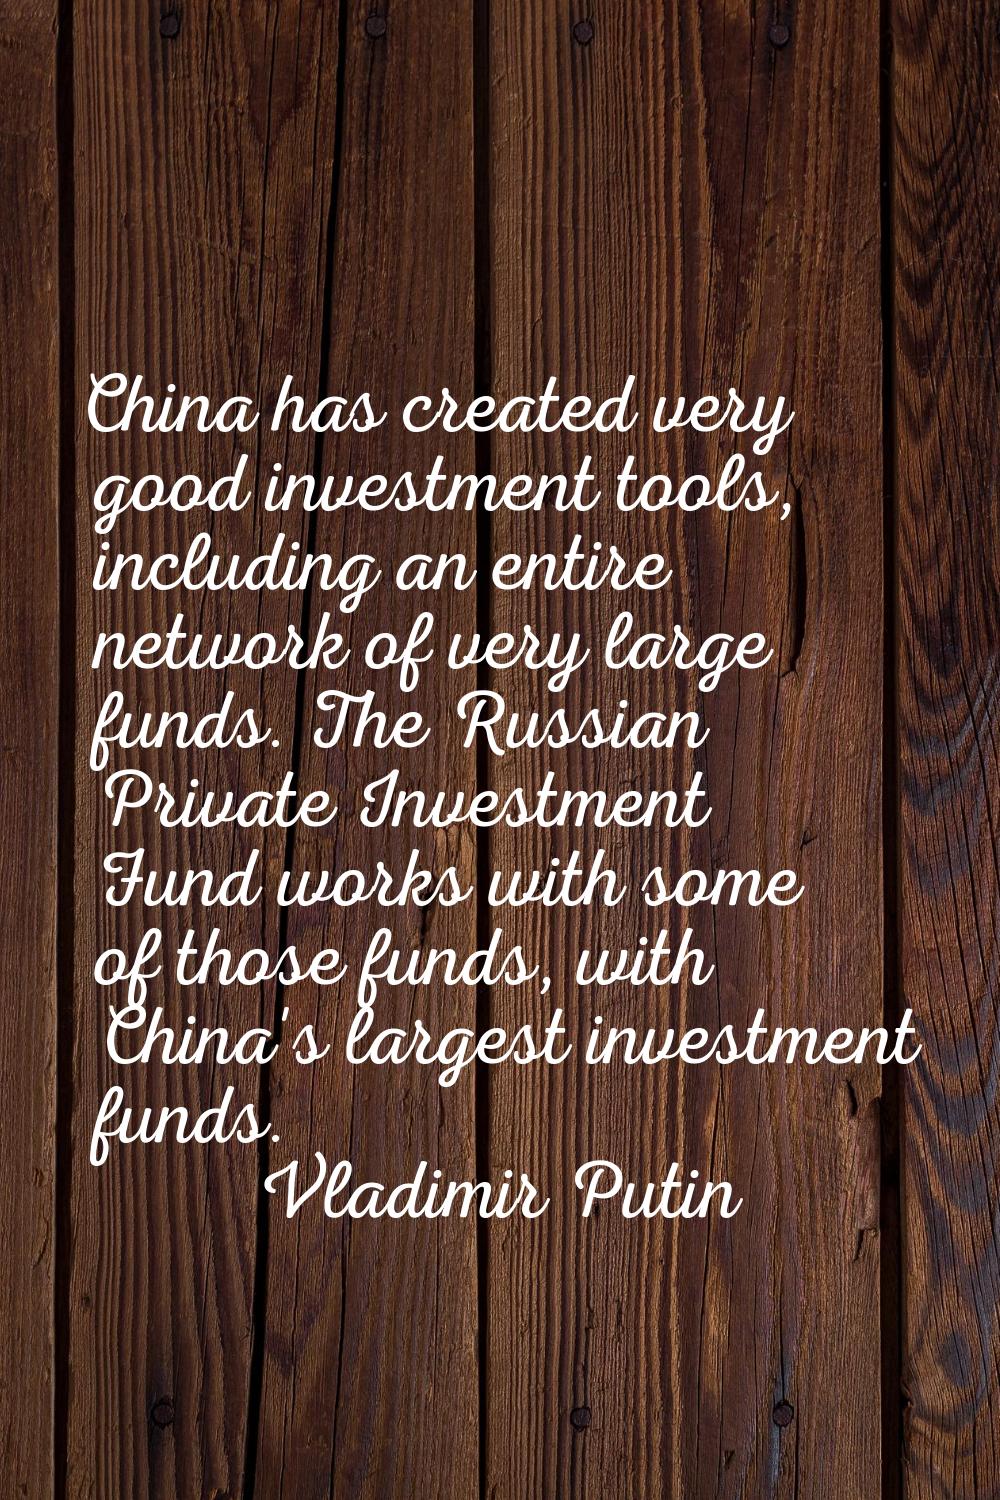 China has created very good investment tools, including an entire network of very large funds. The 